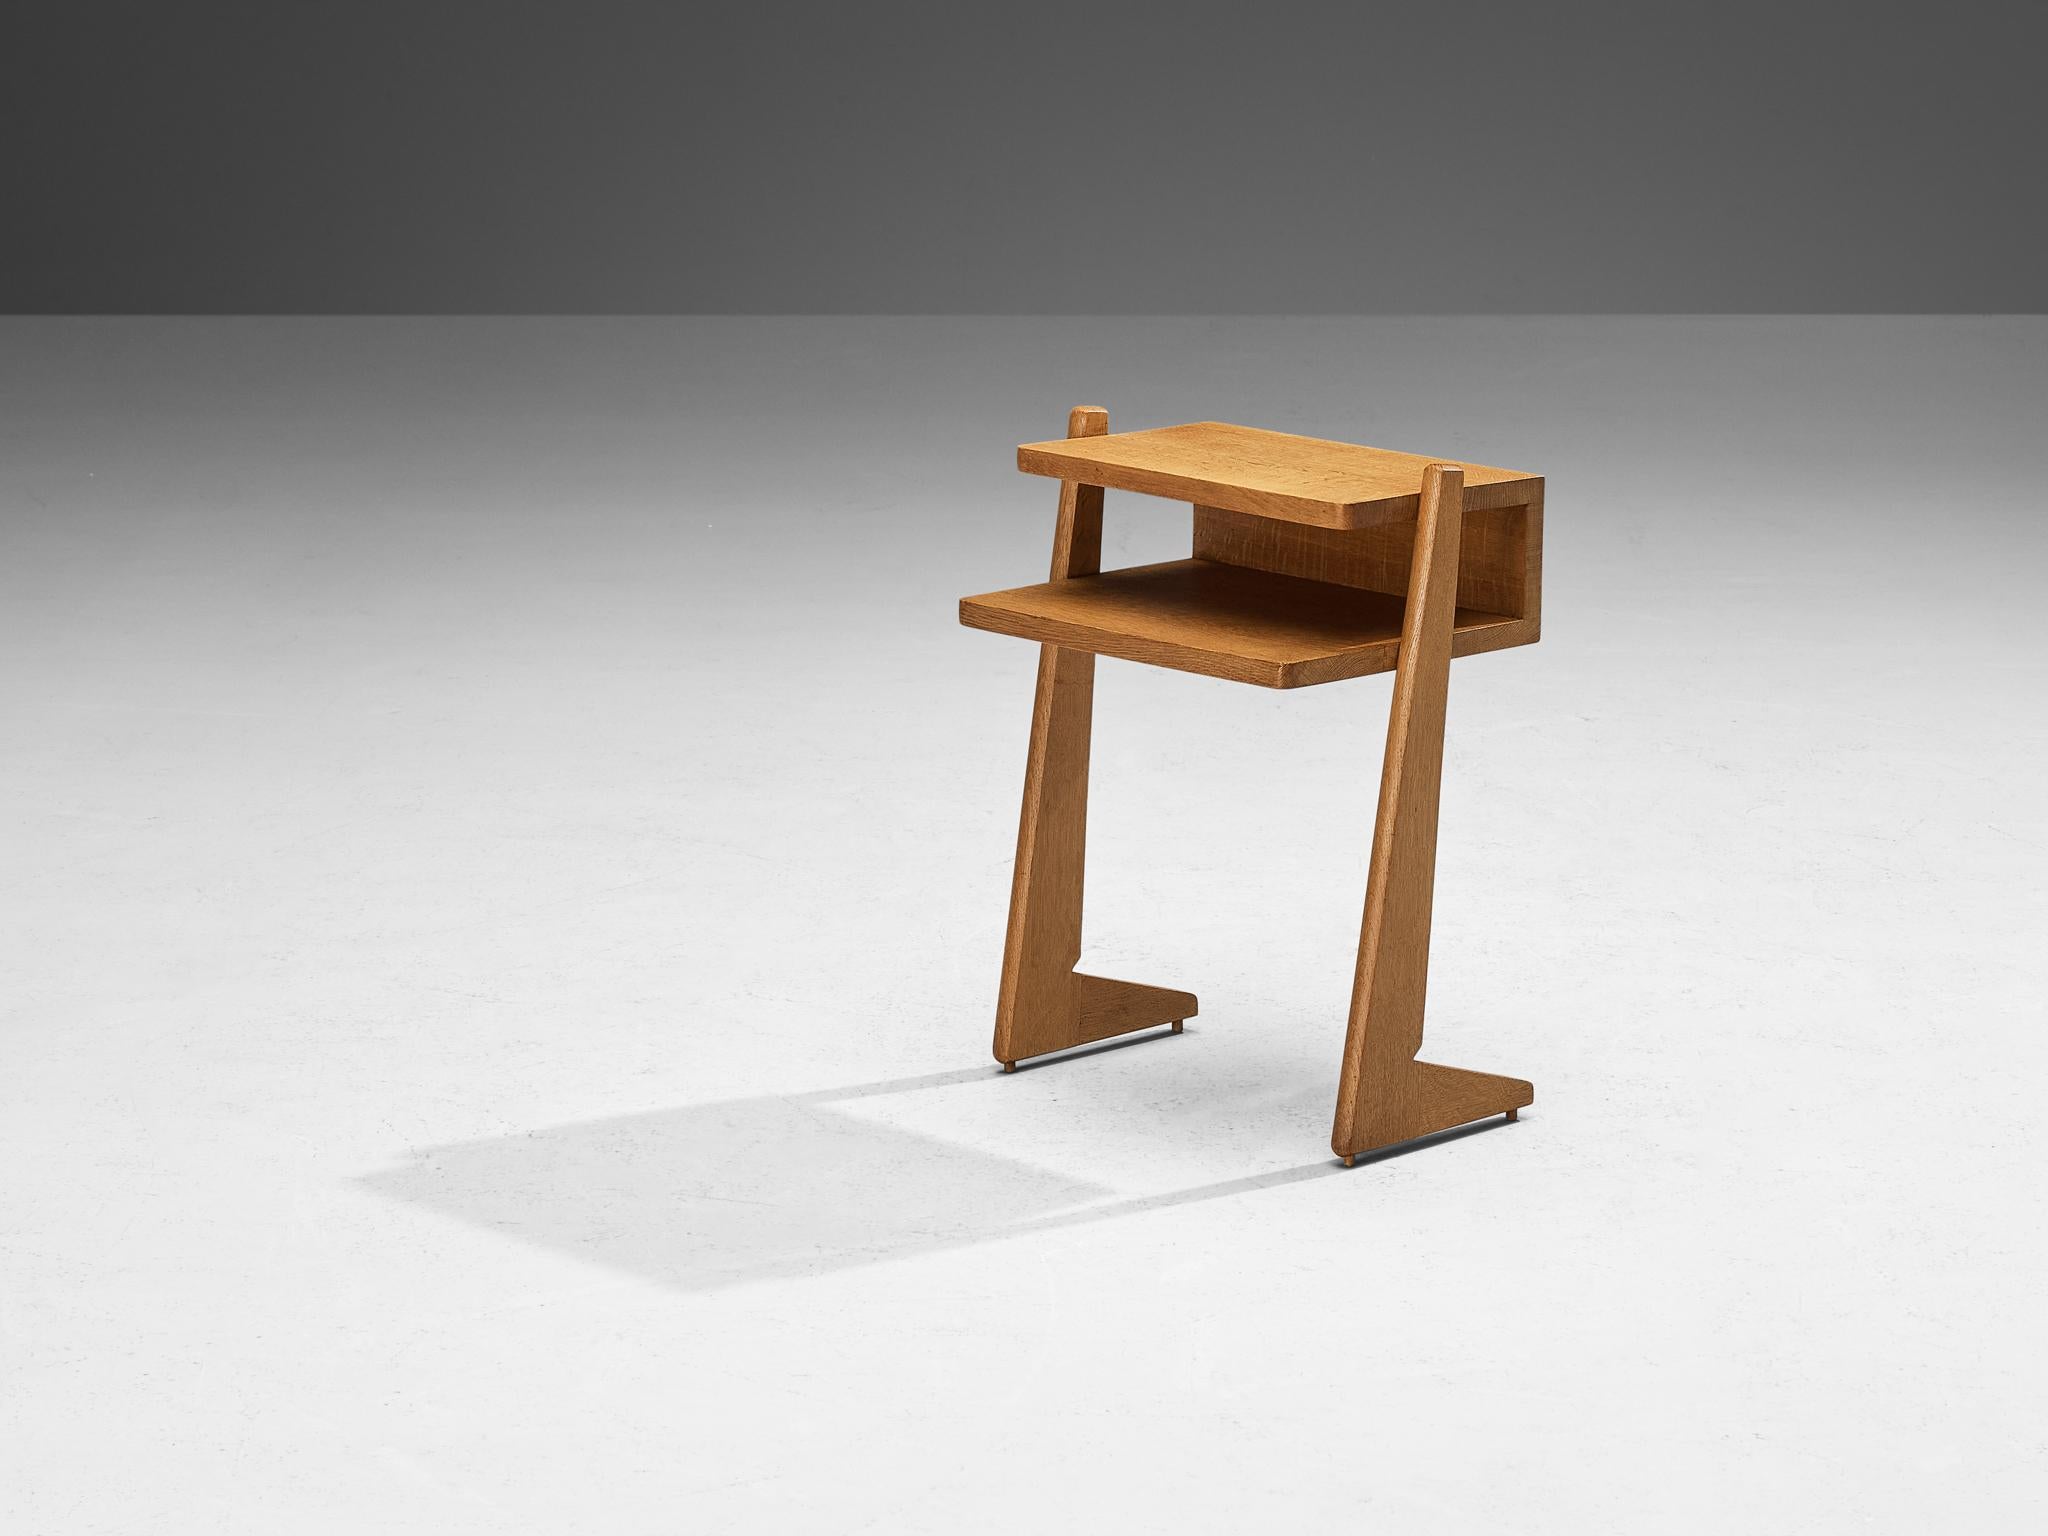 Guillerme et Chambron for Votre Maison, night side table, model '381', solid oak, France, 1960s

Night stand with a geometric shape which uses elements of balance on opposite sides, and a game of proportion. The unit is pretty corporal but easy to